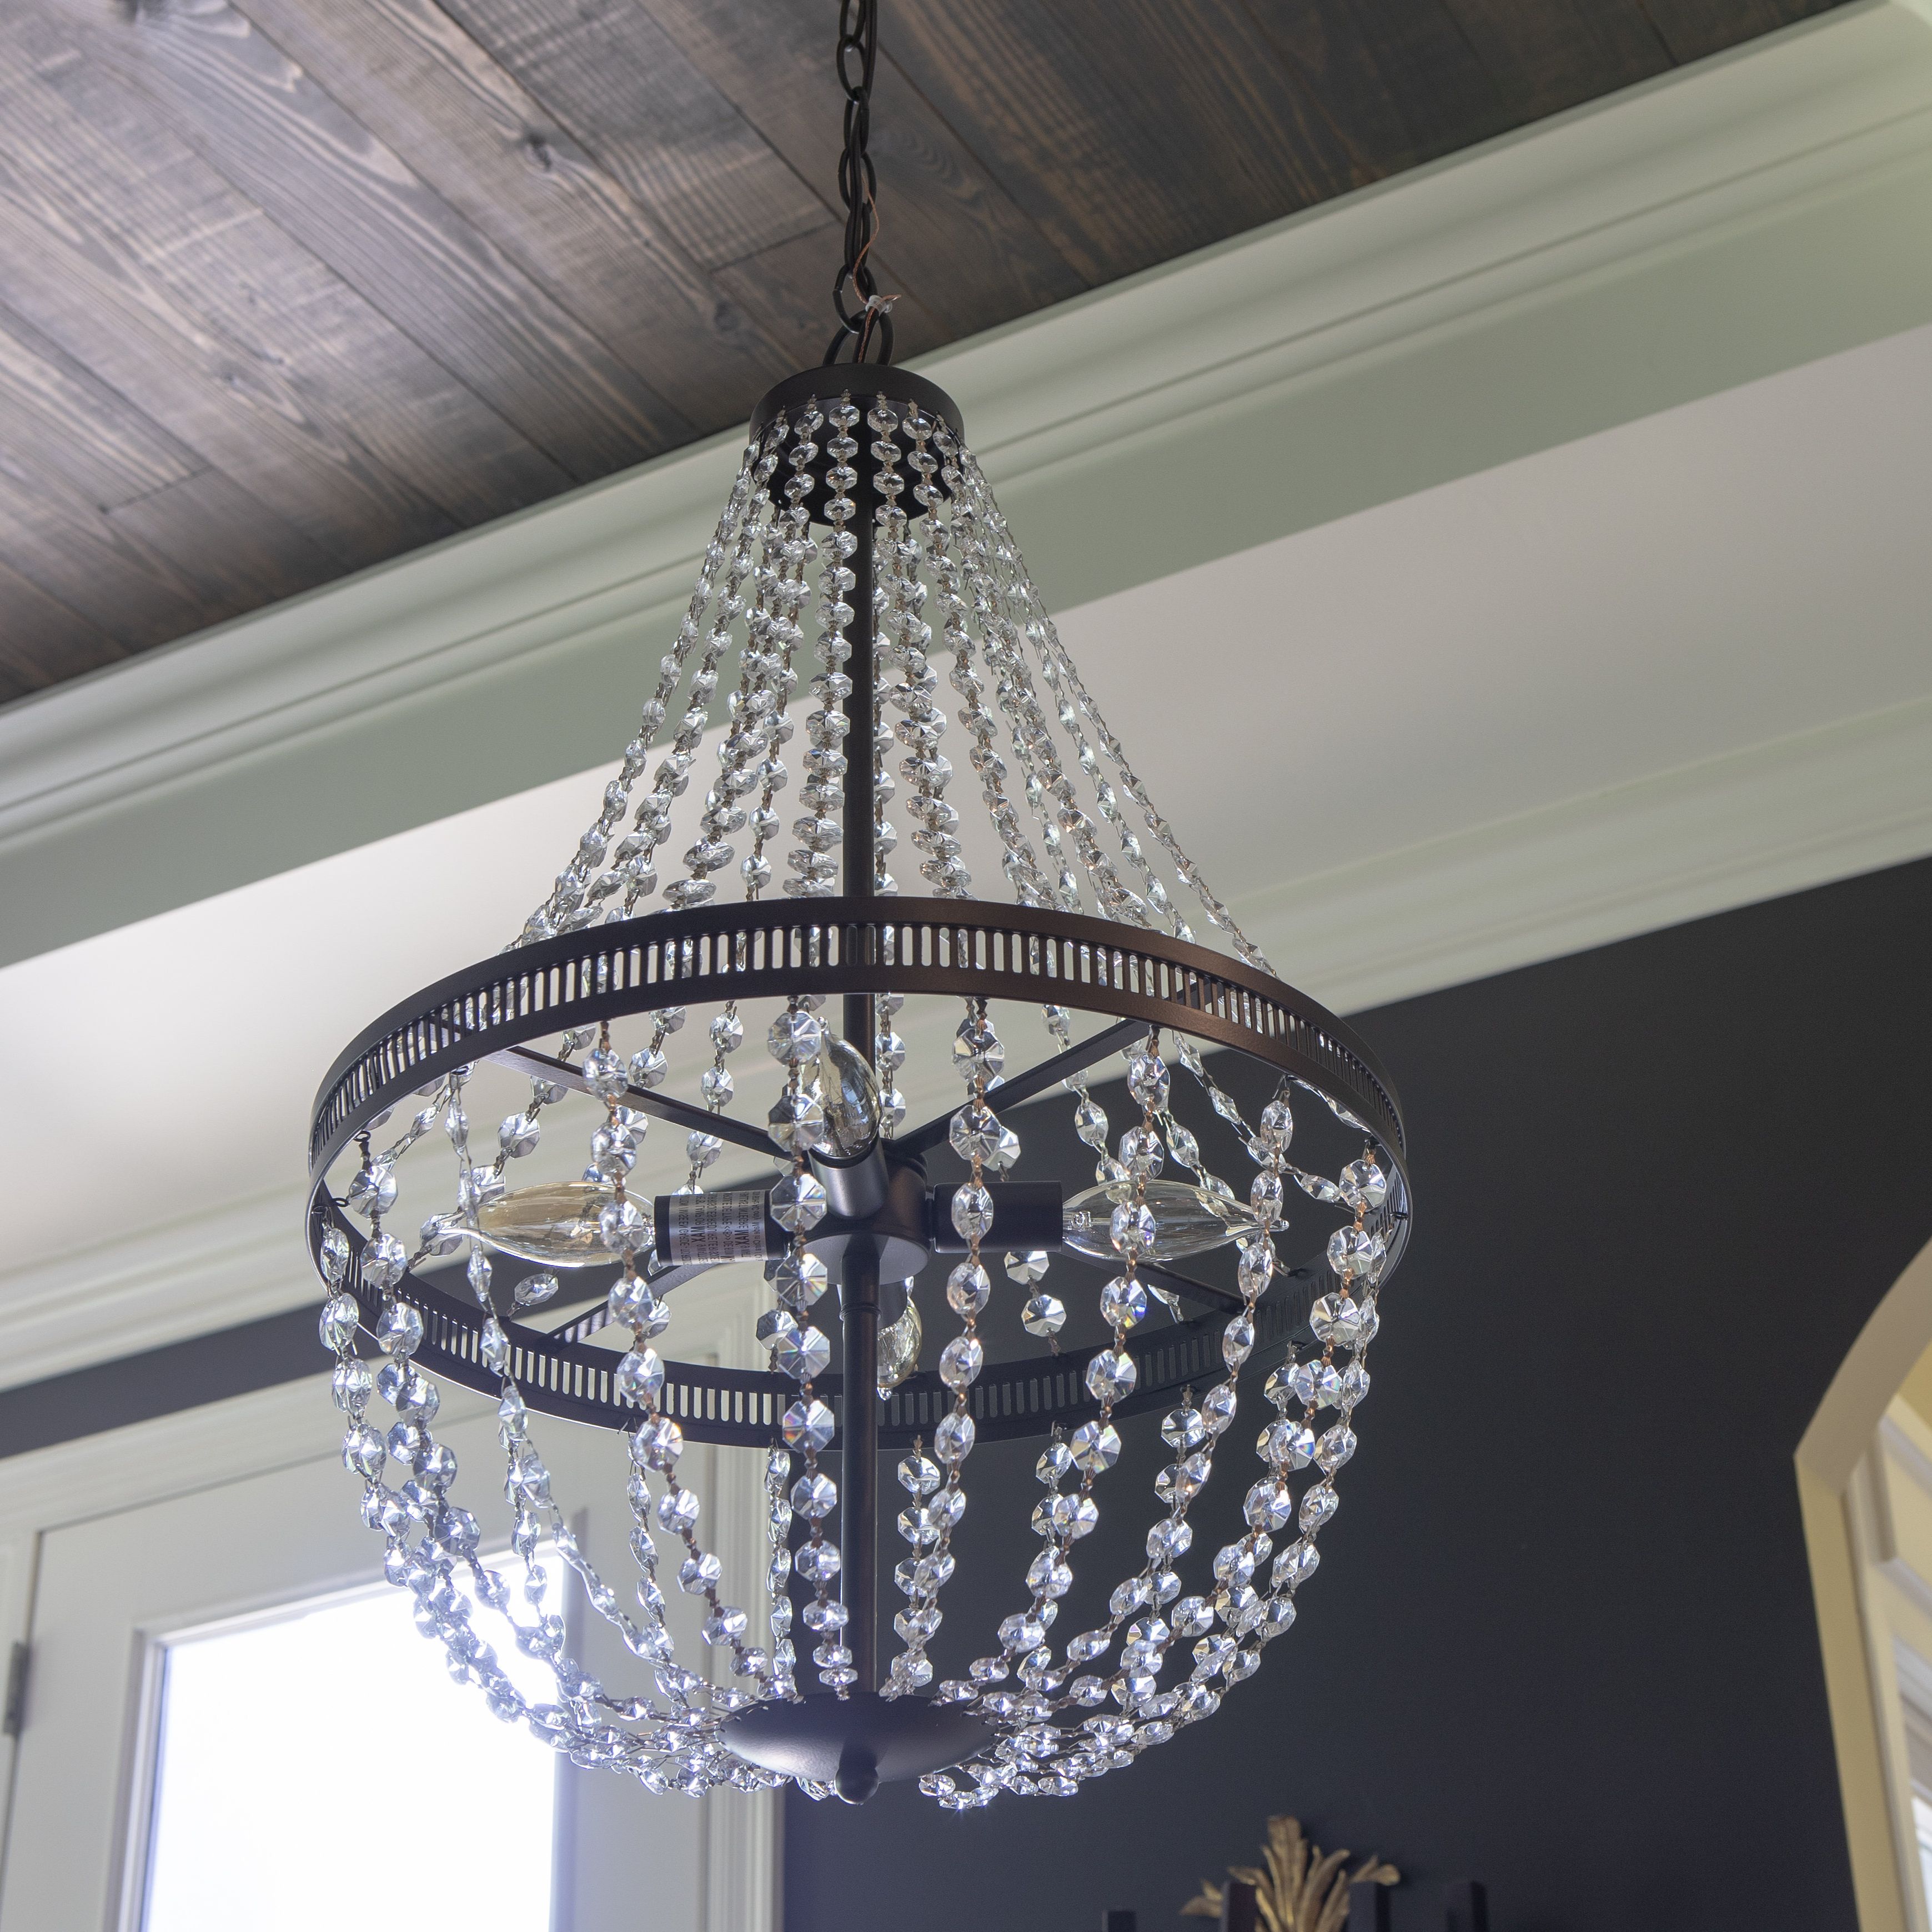 Jill 4 Light Drum Chandeliers With Regard To Most Current Weidman 4 Light Crystal Chandelier (View 14 of 25)